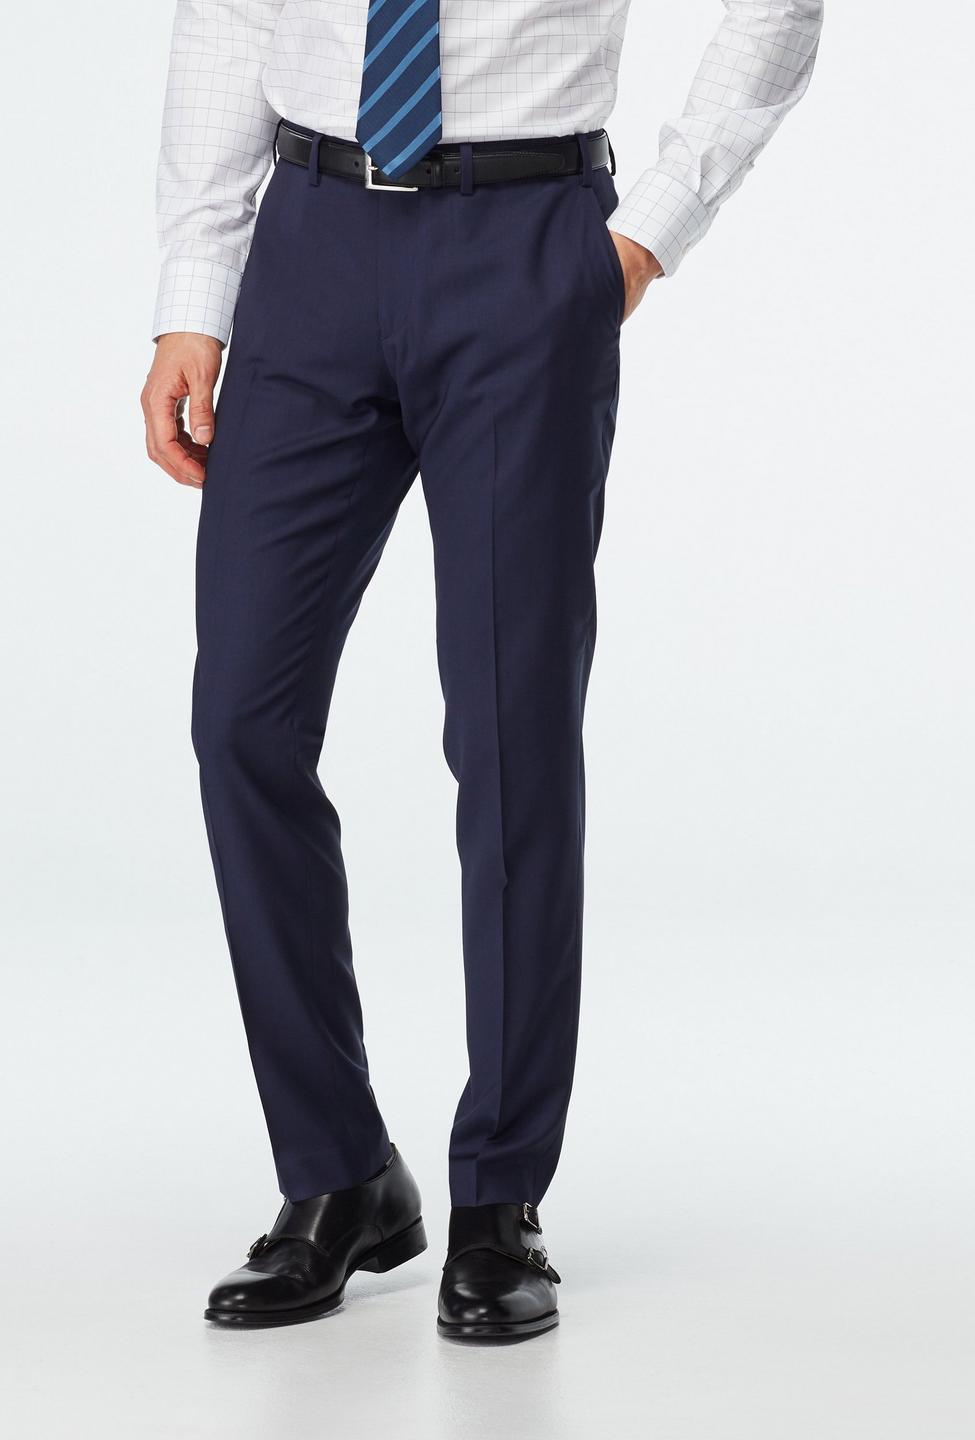 Navy pants - Milano Solid Design from Luxury Indochino Collection